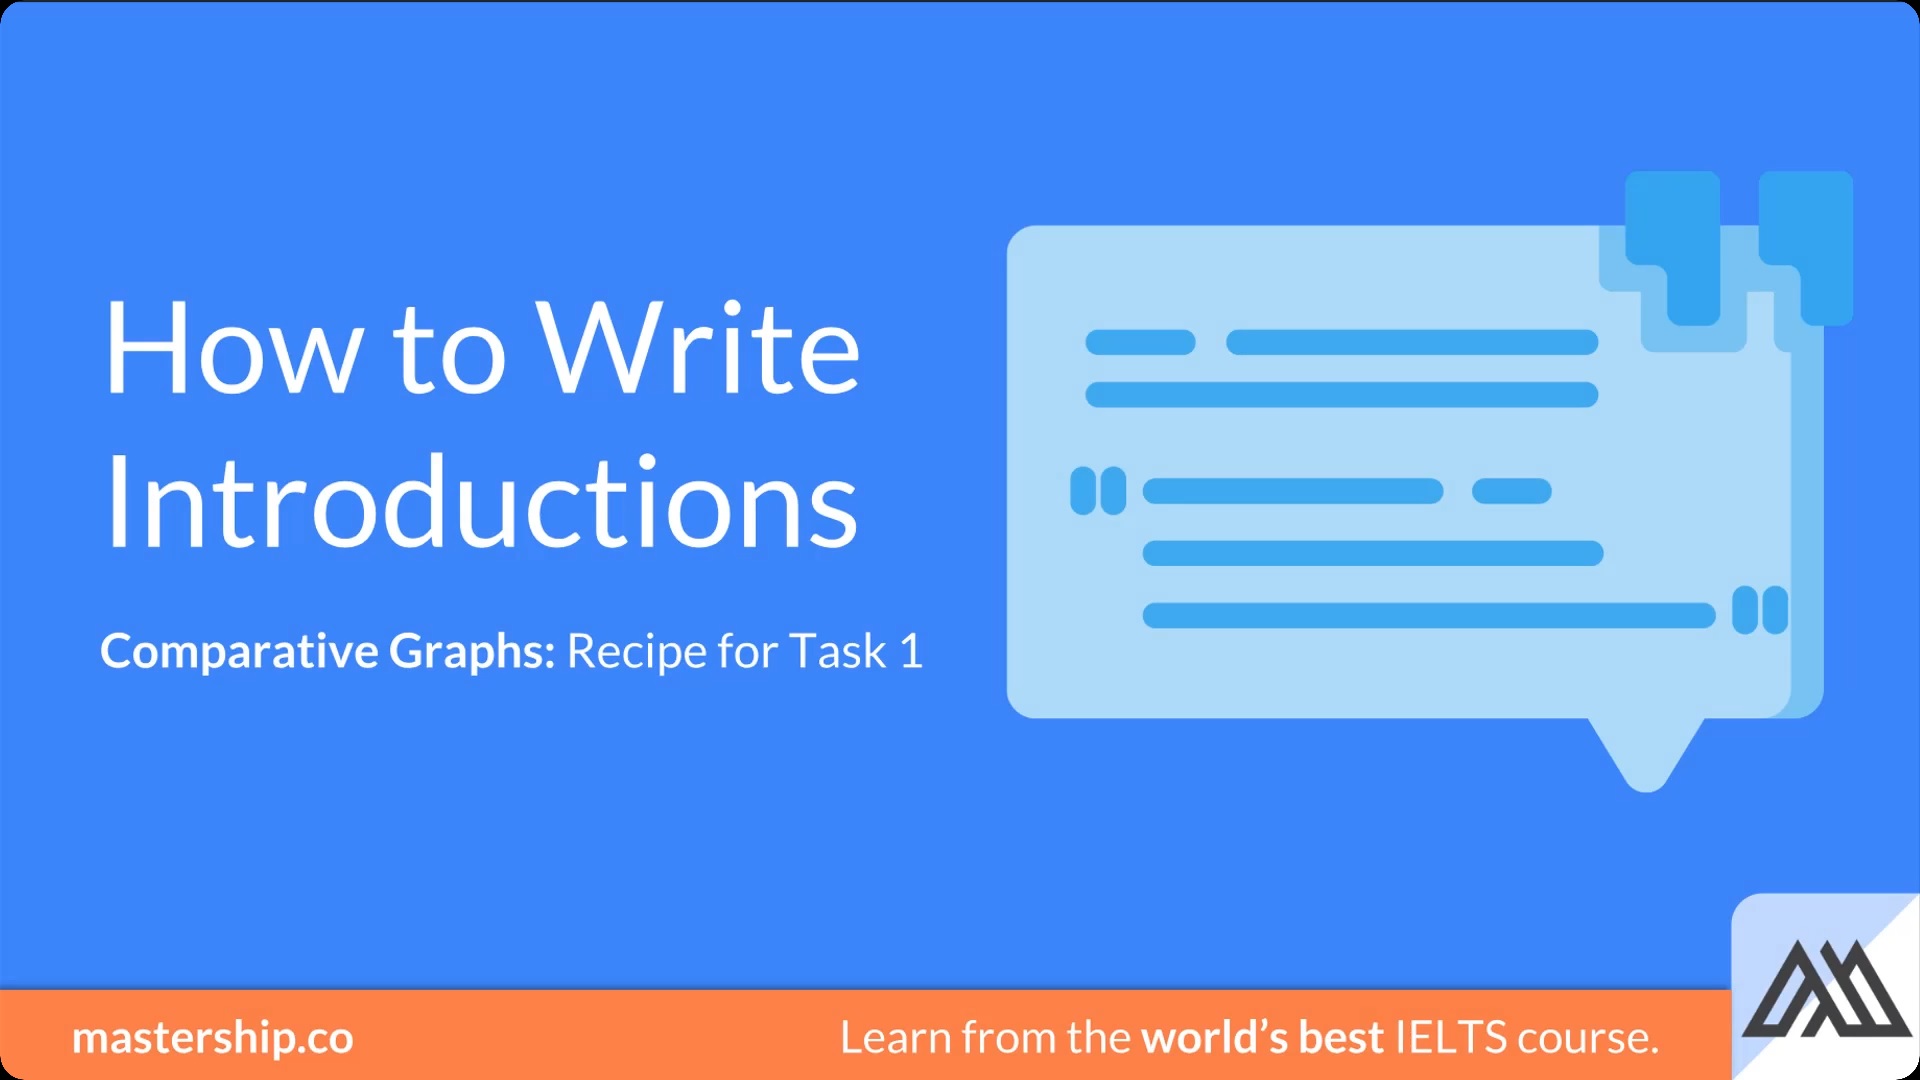 How to Write Introductions for Comparative Graphs